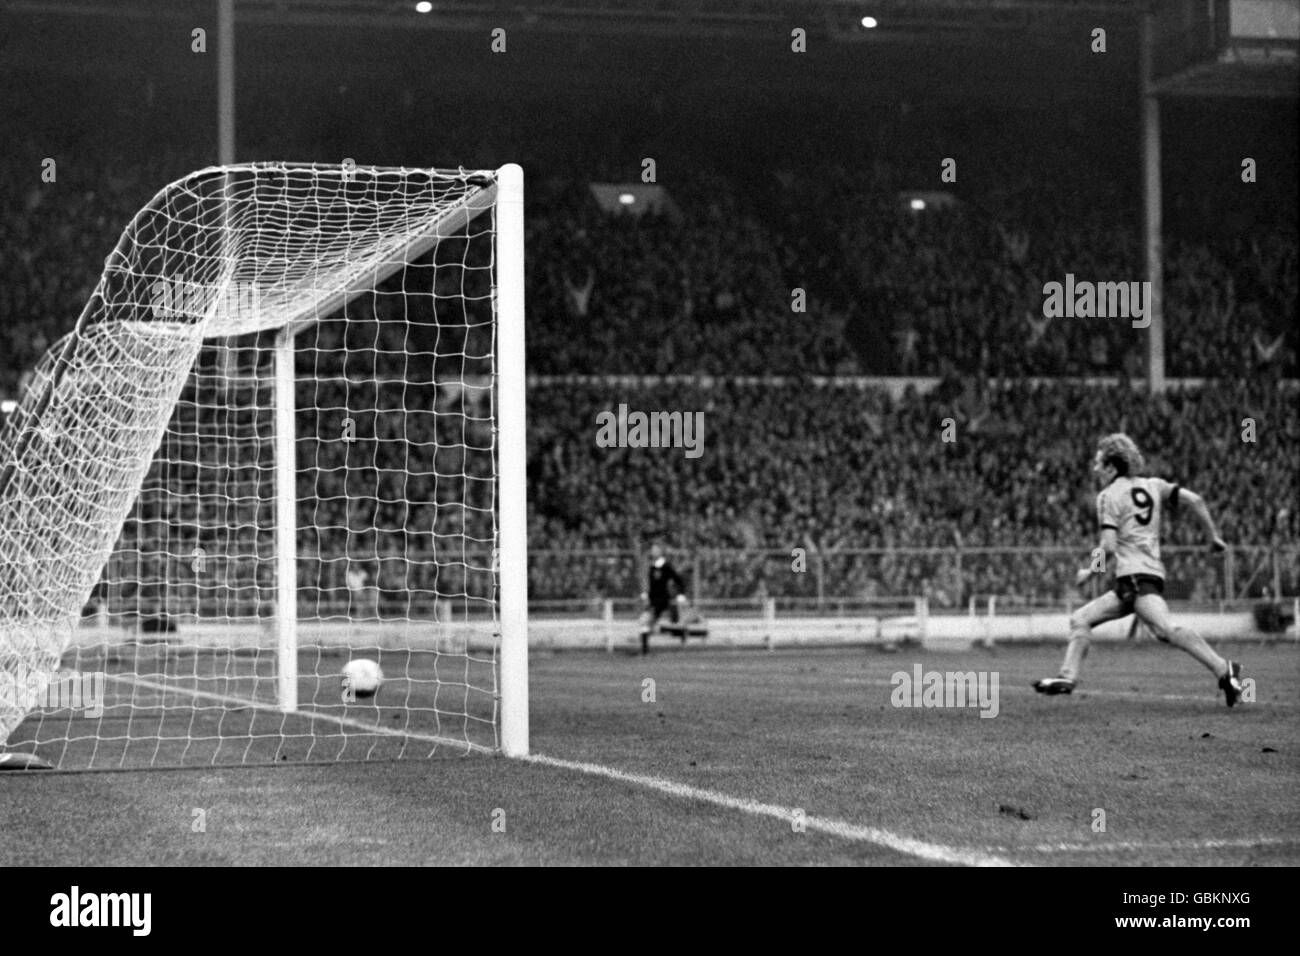 Soccer - Football League Cup - Final - Wolverhampton Wanderers v Nottingham Forest. Wolverhampton Wanderers' Andy Gray (r) slides the ball into the empty net to score the winning goal Stock Photo